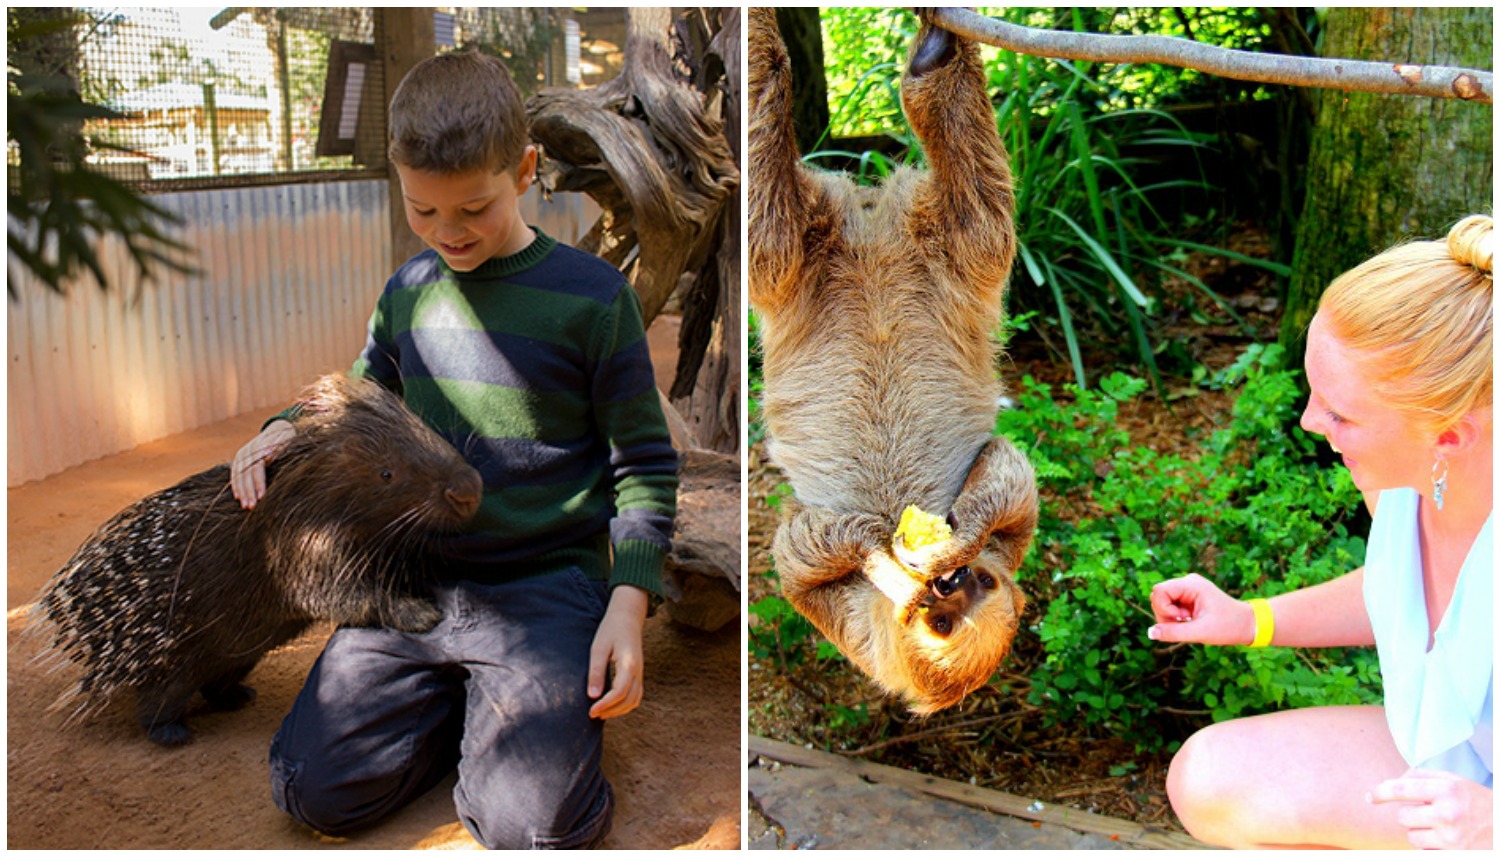 Encounters with a porcupine and a sloth